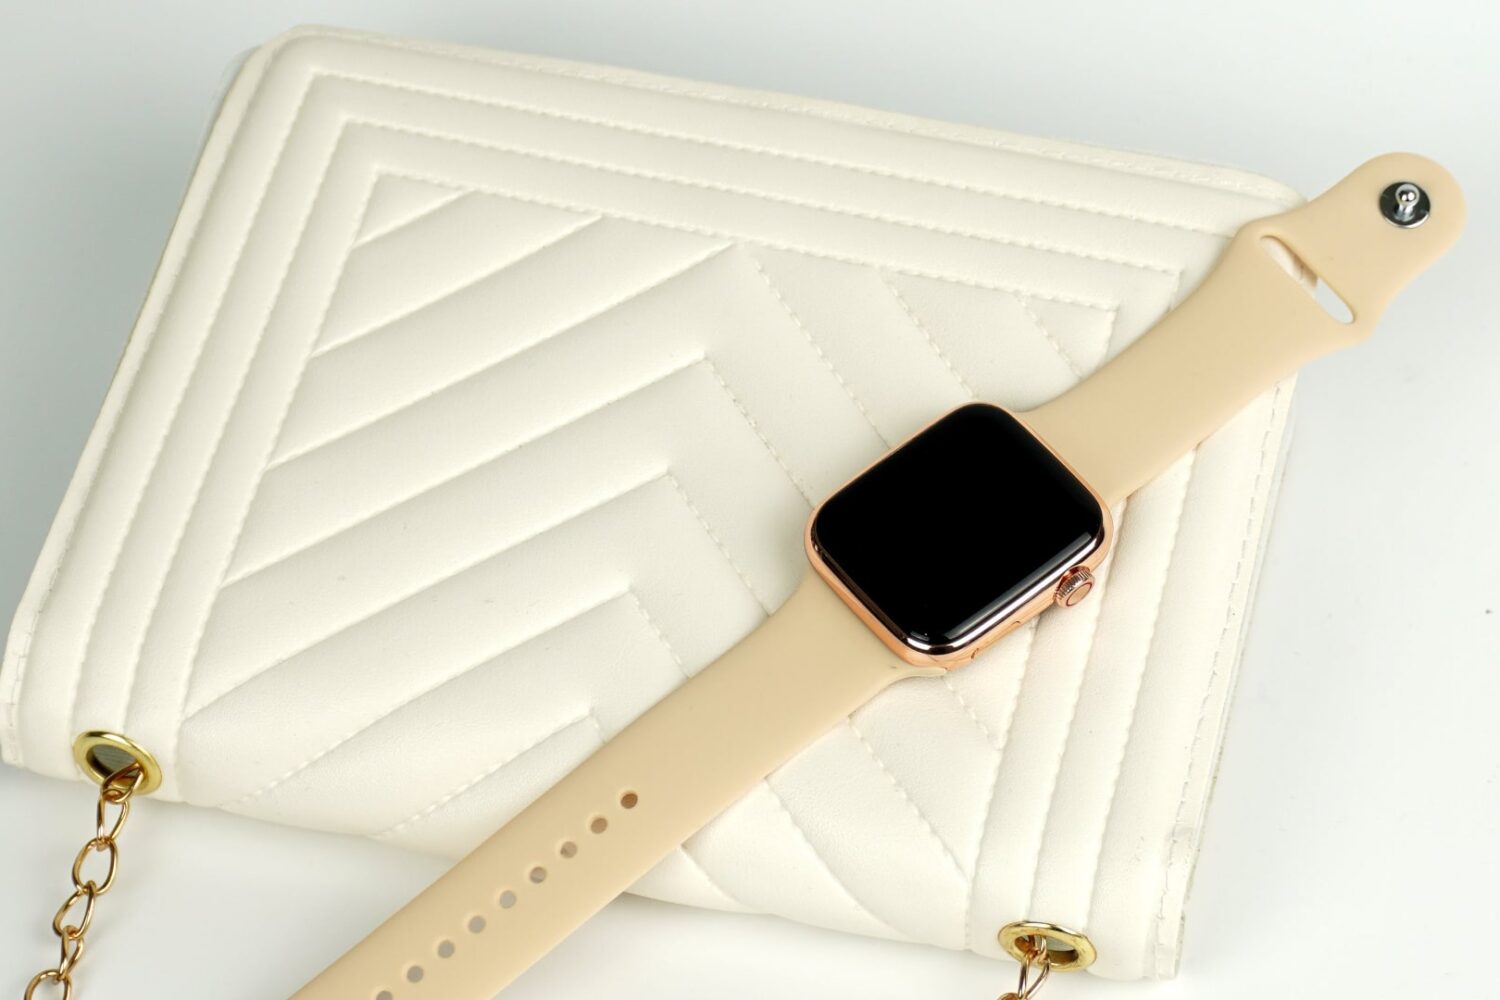 Apple Watch Series 9 with Sport Band on top of a creamy female handbag